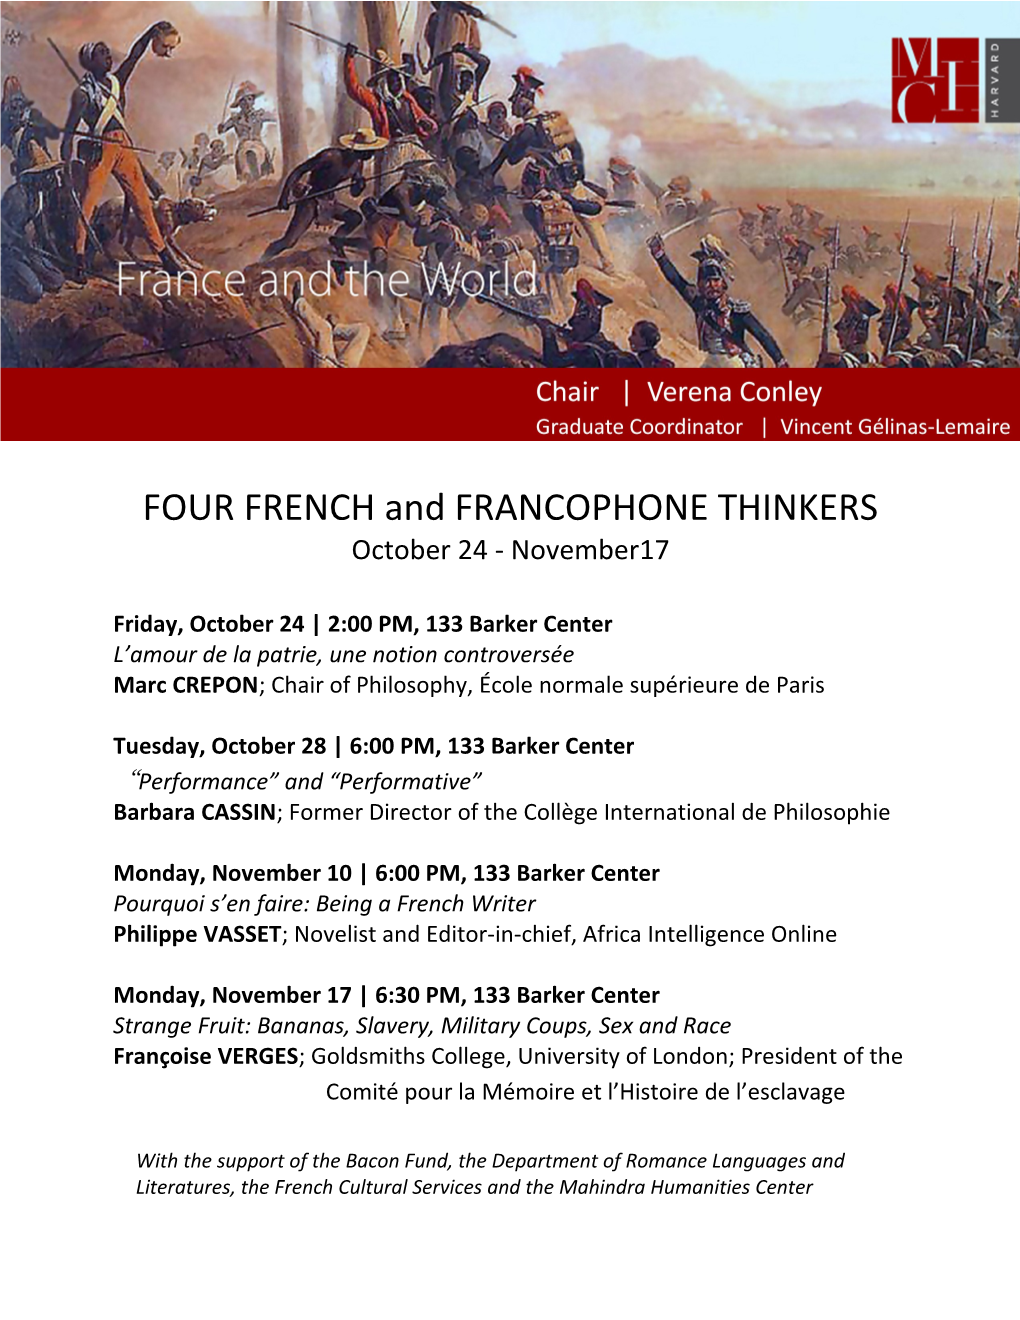 FOUR FRENCH and FRANCOPHONE THINKERS